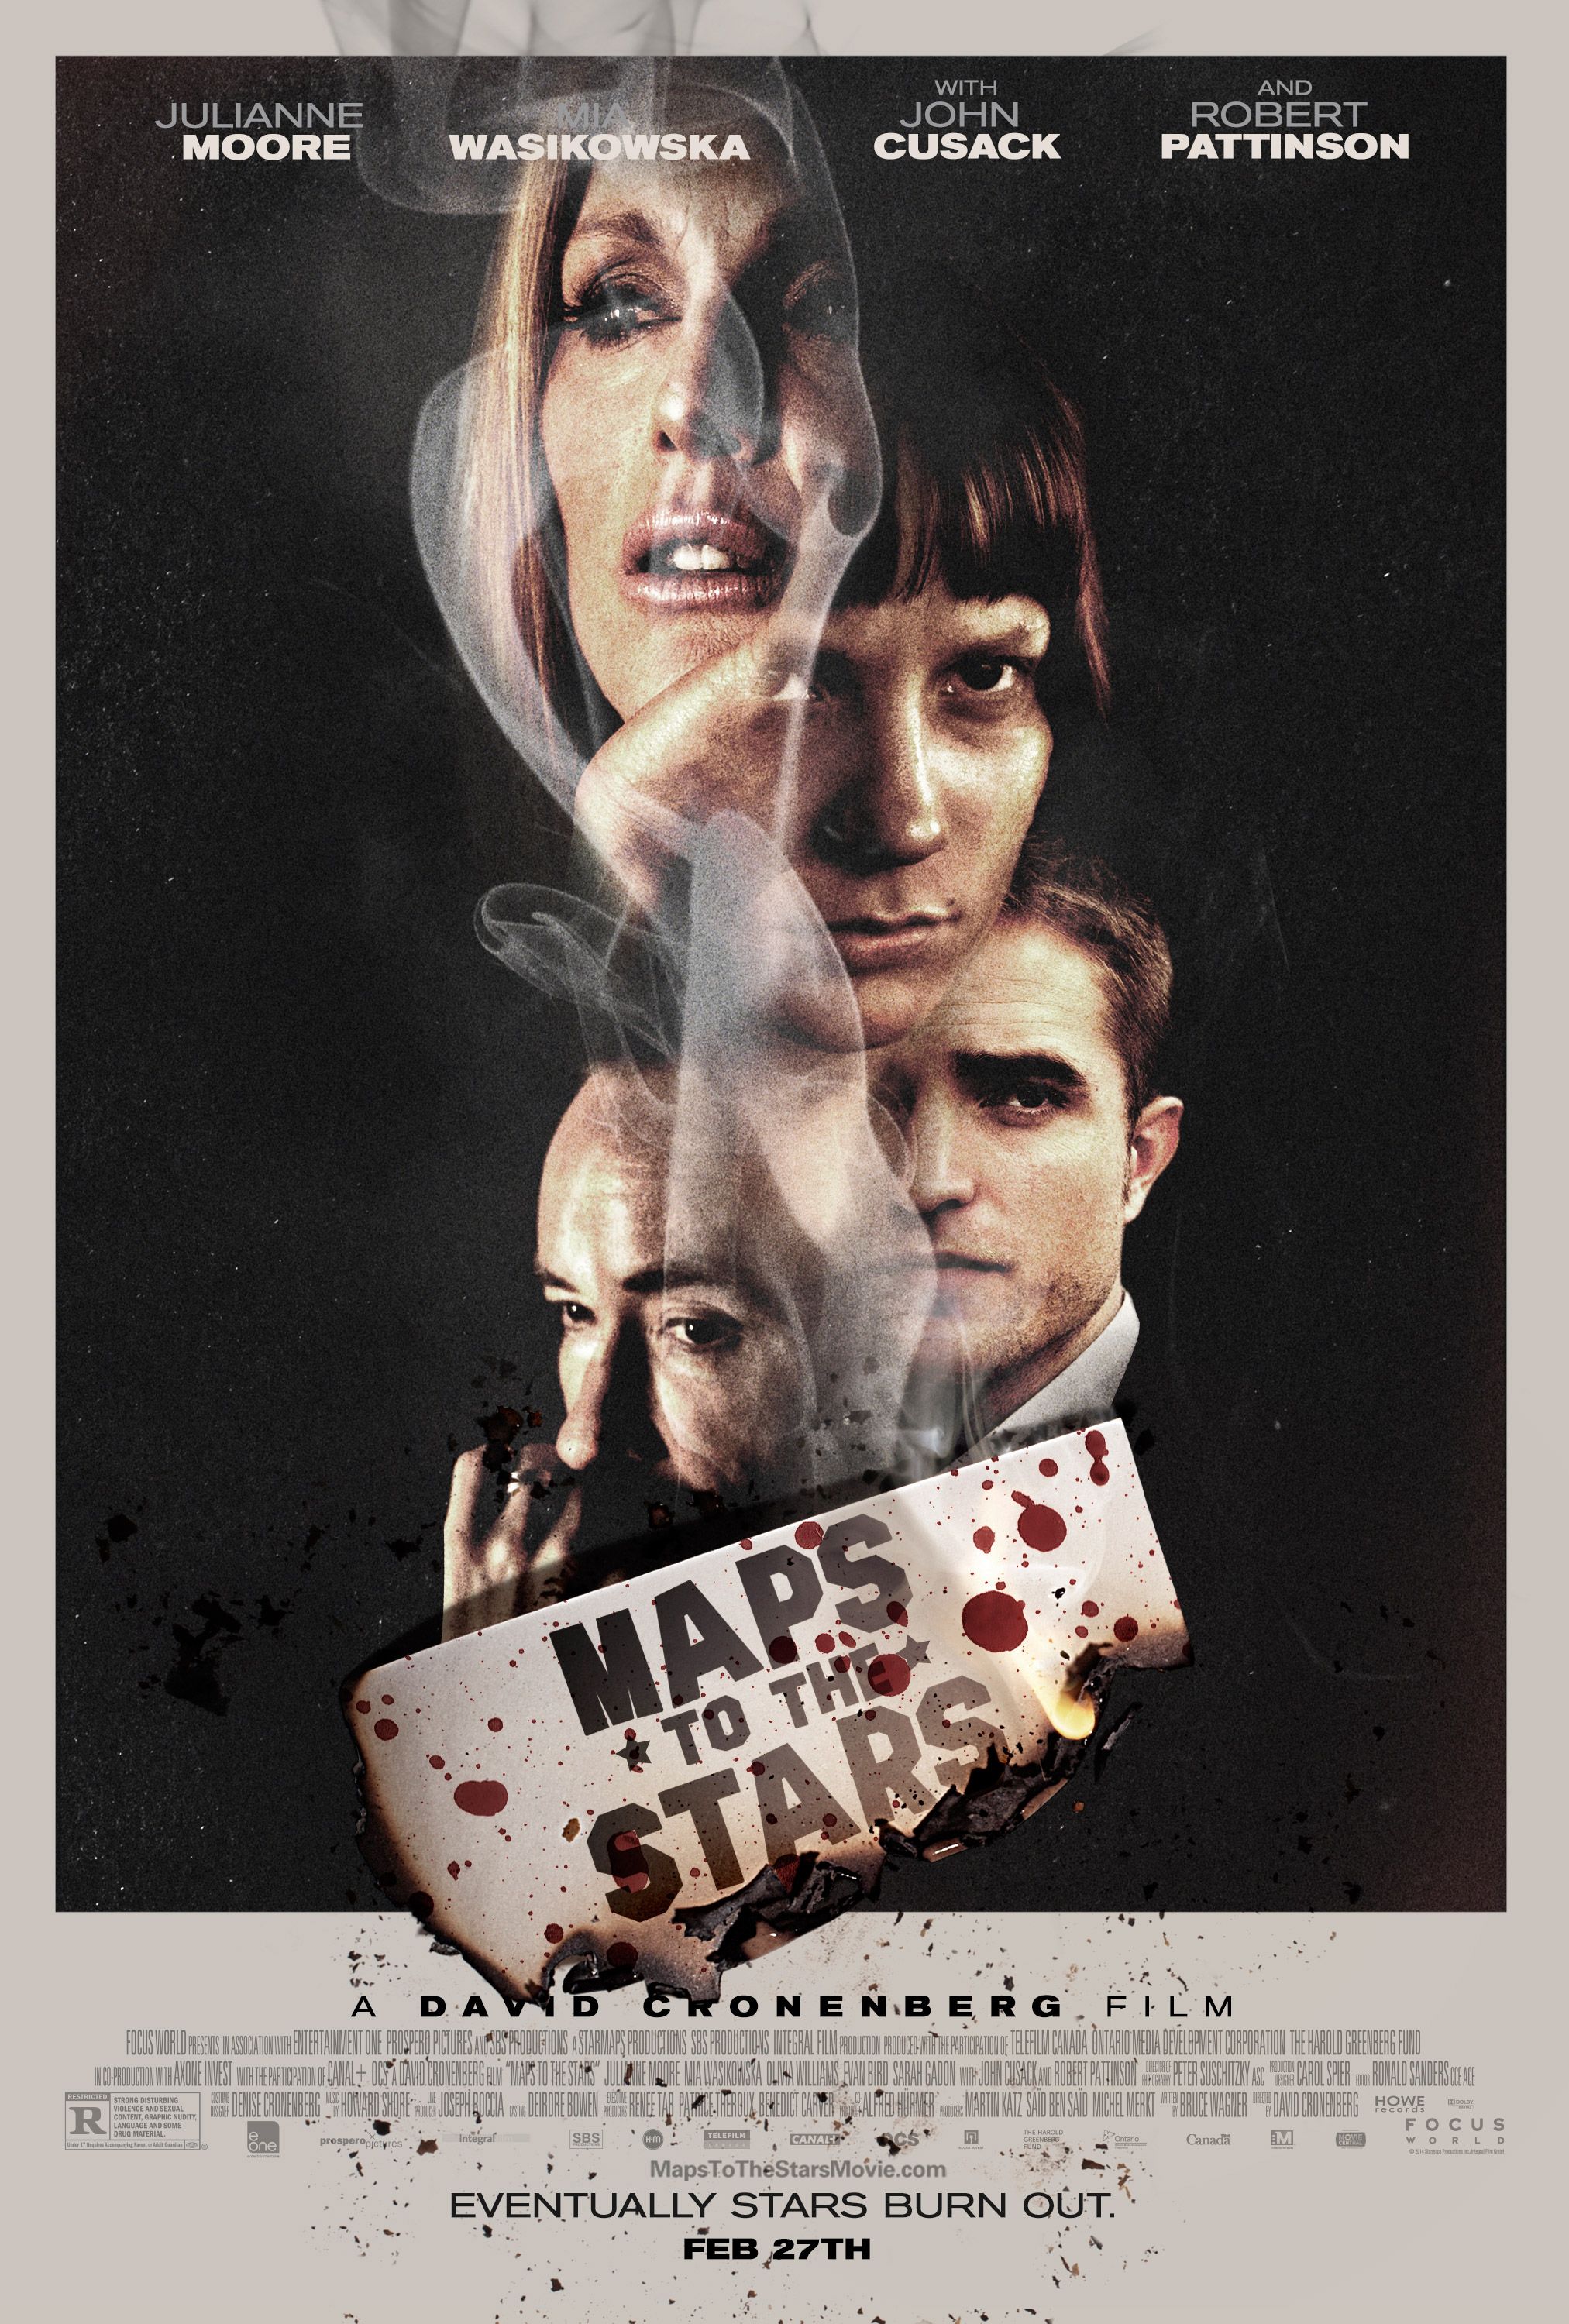 Maps To The Stars Trailer And Poster Featuring Julianne Moore